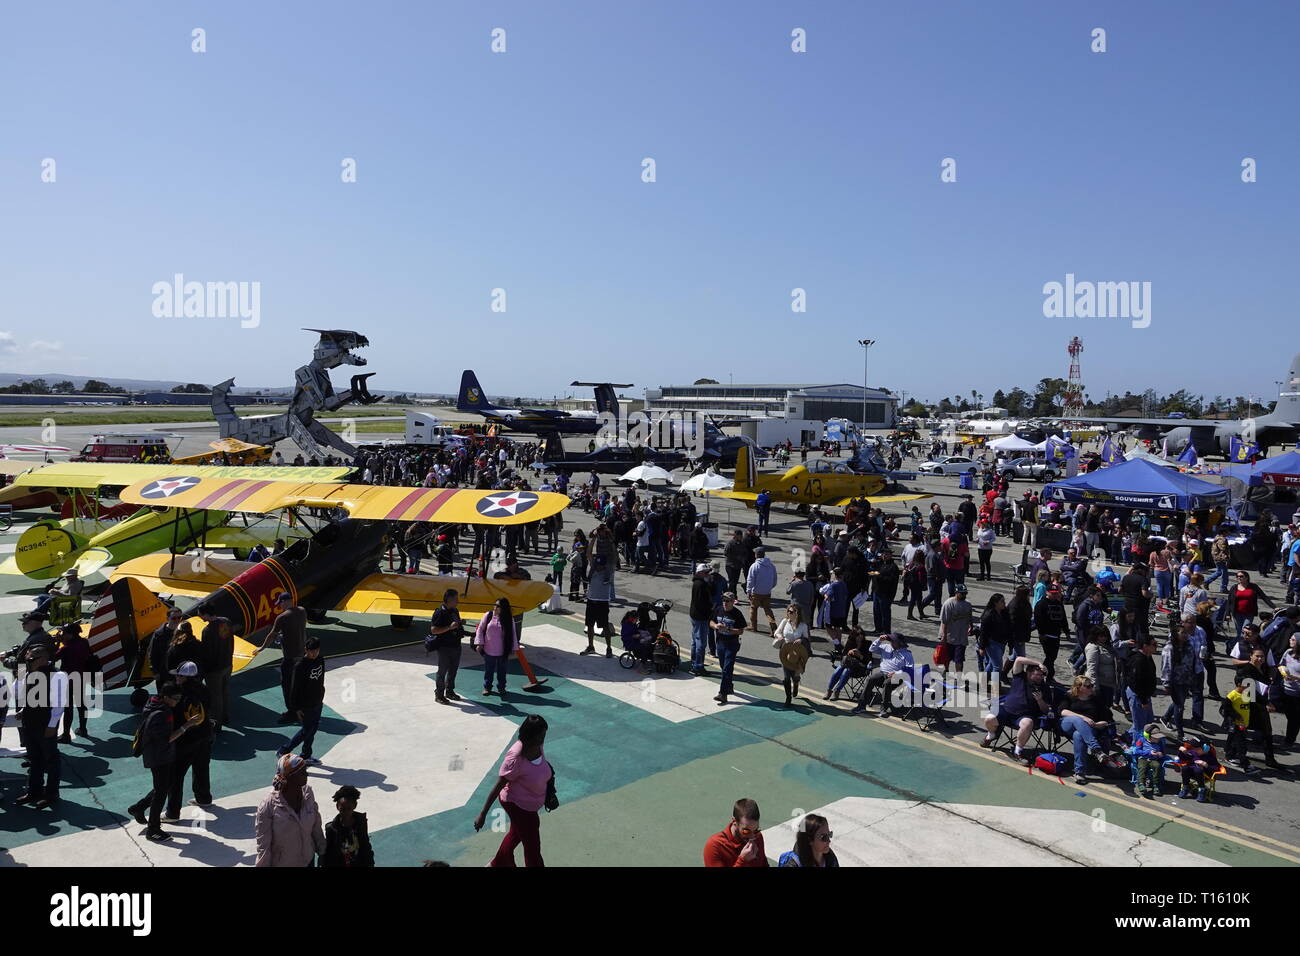 California, USA. 23rd Mar, 2019. 23rd March, 2019   Salinas, California, USA      Scvenes from the annual  Salinas Air-Show, featuring the US Navy 'Blue Angels' arobatic team Credit: Motofoto/Alamy Live News Stock Photo